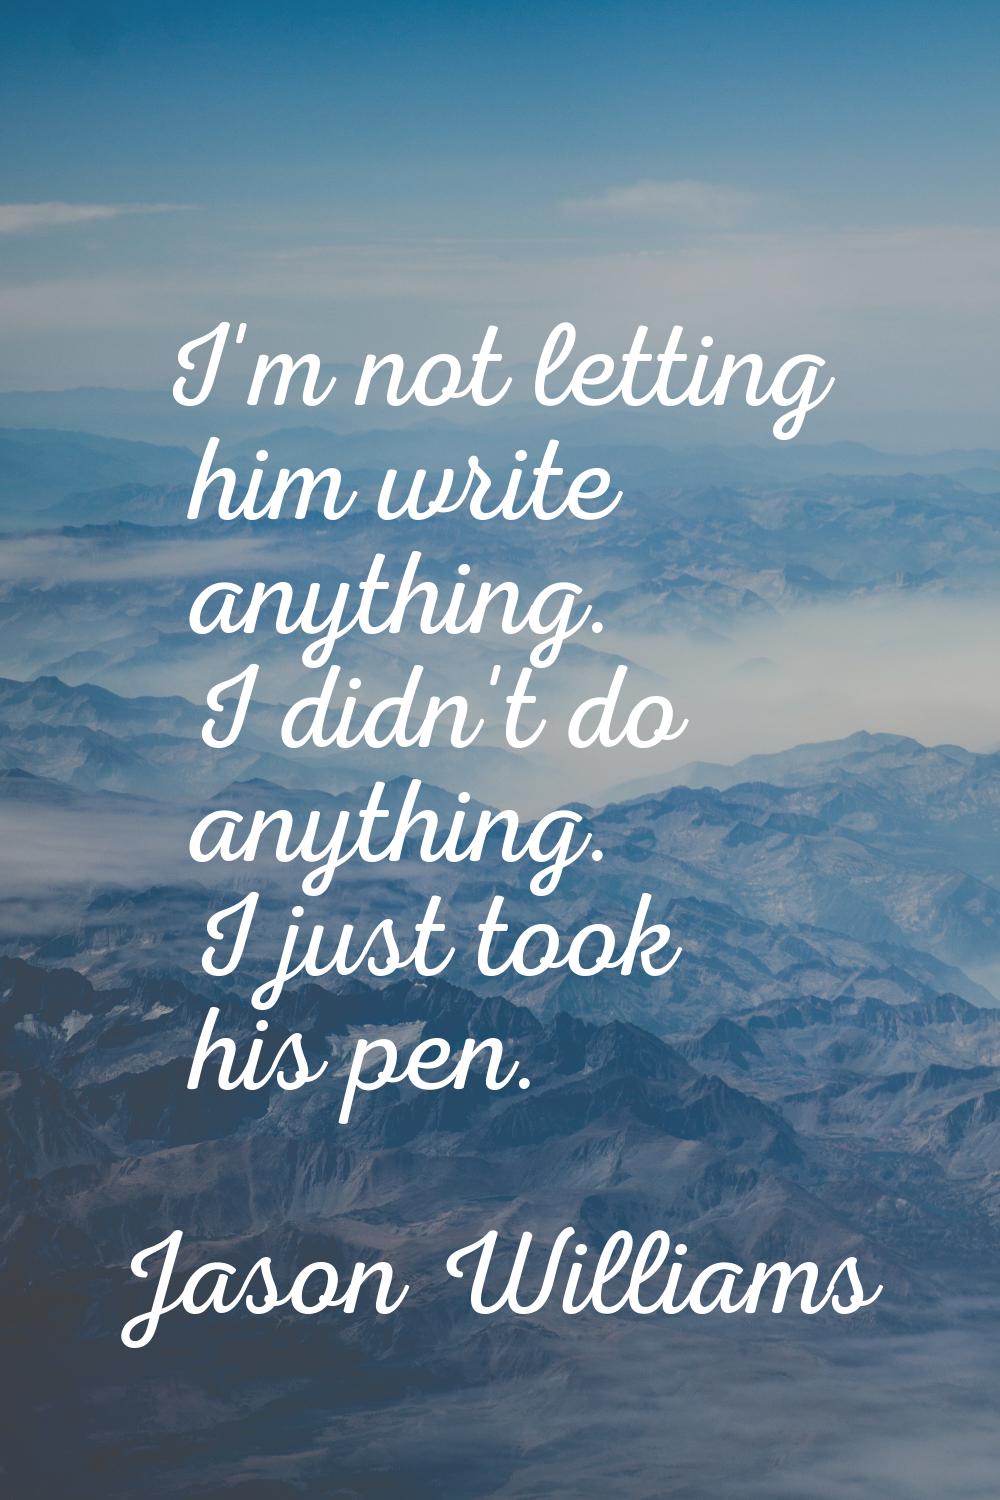 I'm not letting him write anything. I didn't do anything. I just took his pen.